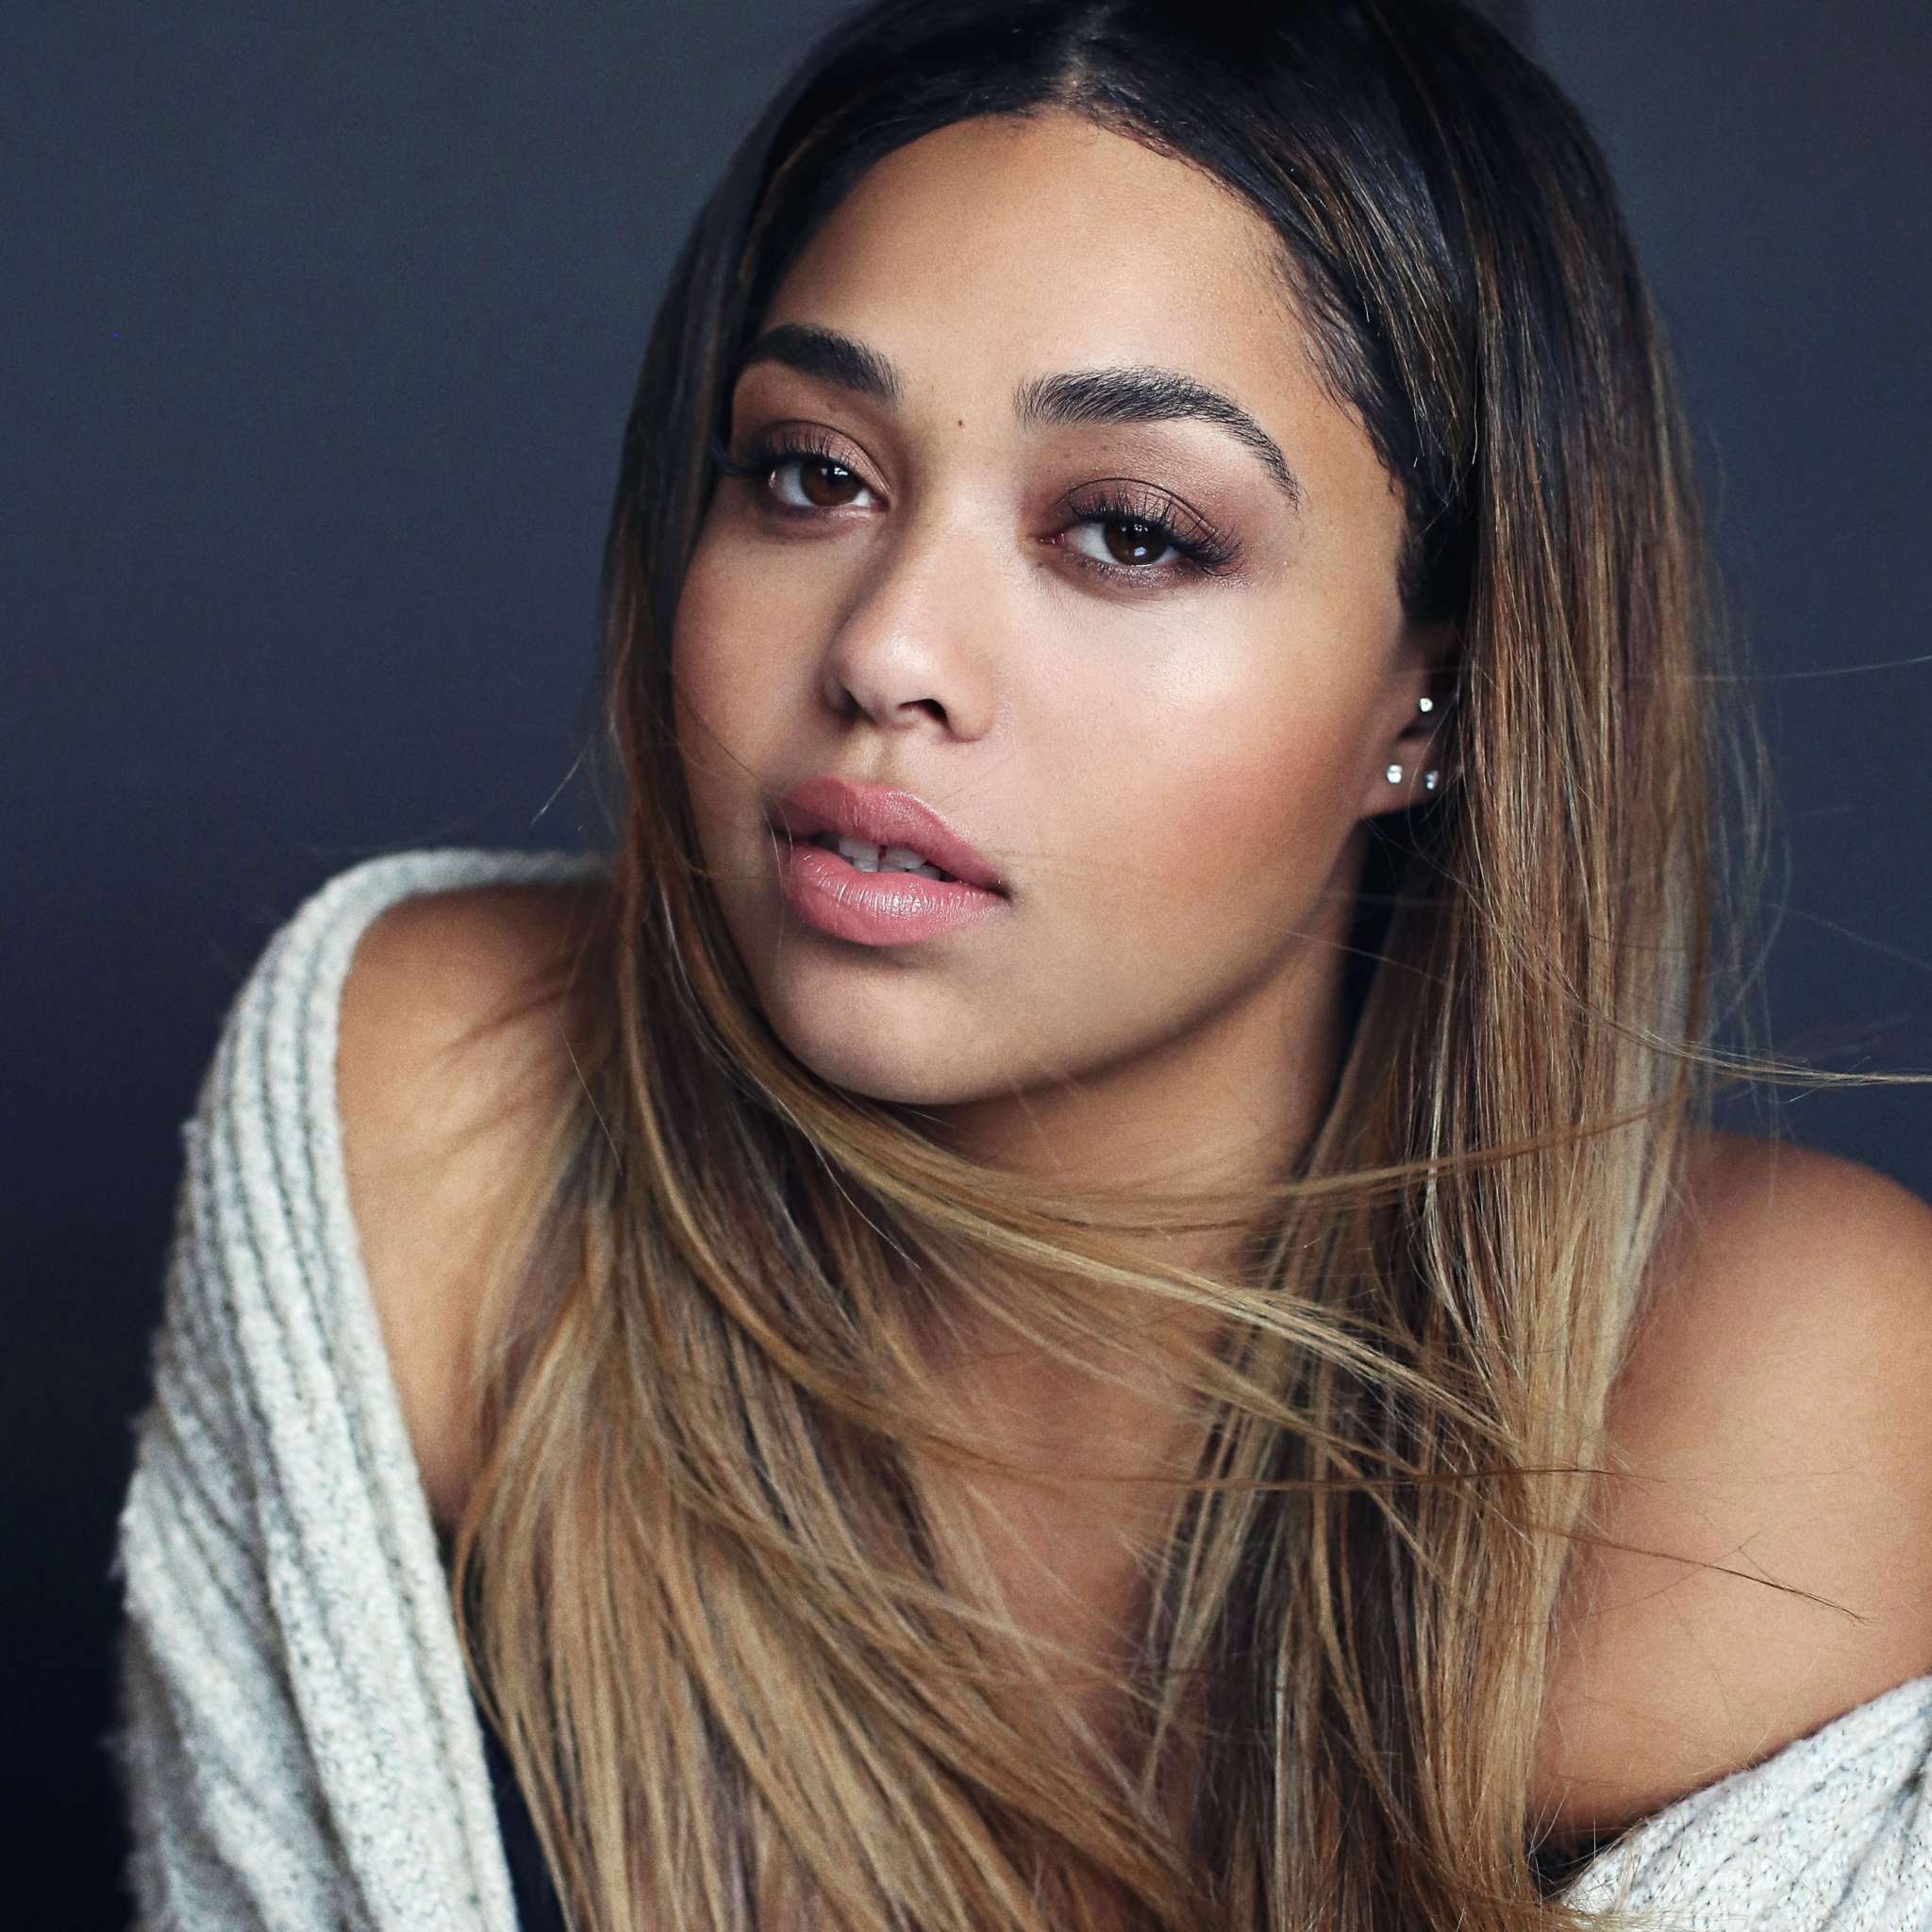 Jordyn Woods Shares New Pics From Her Home And Fans Go Crazy Over The Jaw Dropping View